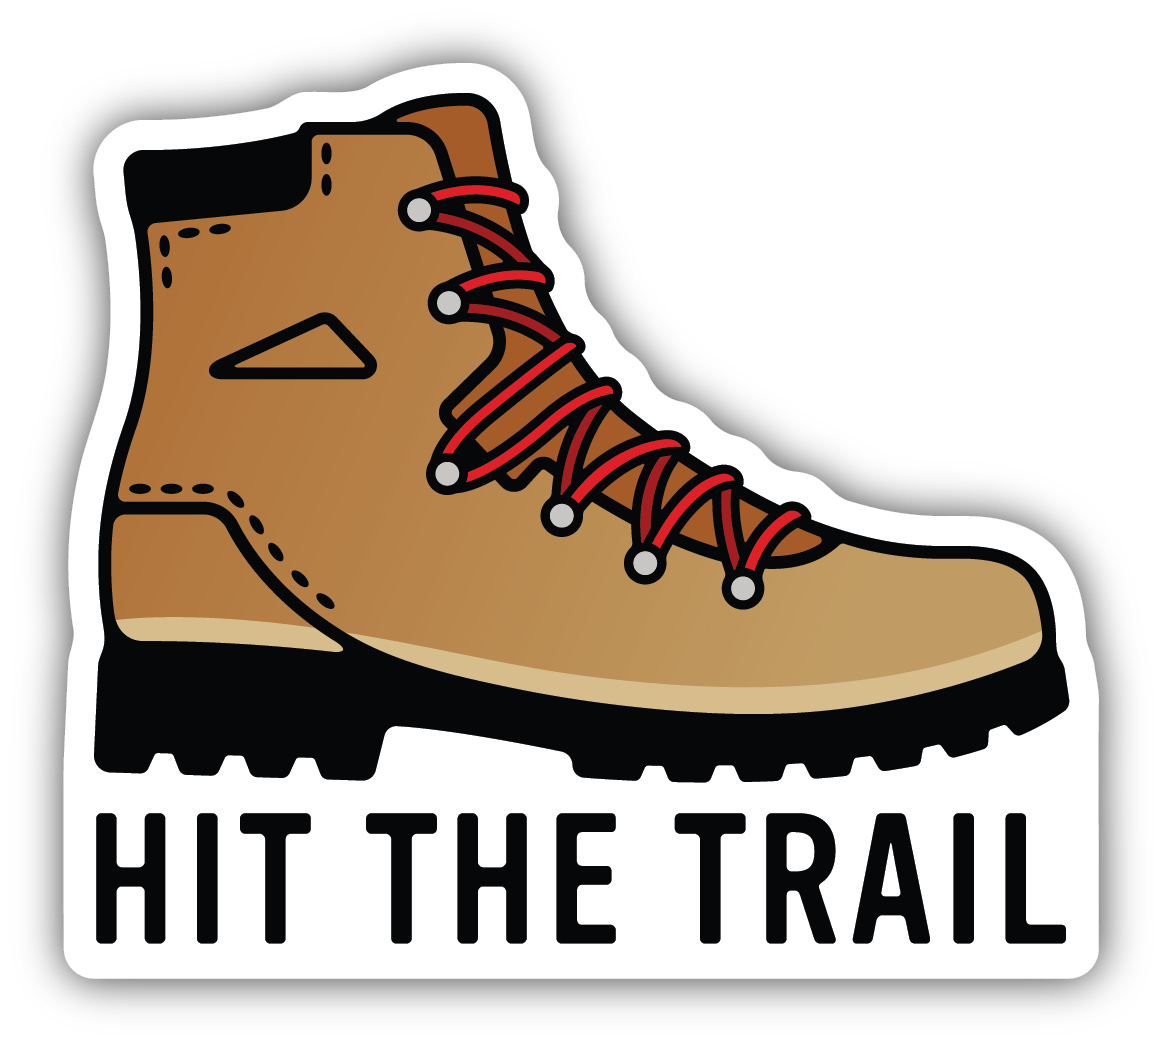 sticker on white background. sticker has graphic of hiking boot and "hit the trail" text along the bottom.